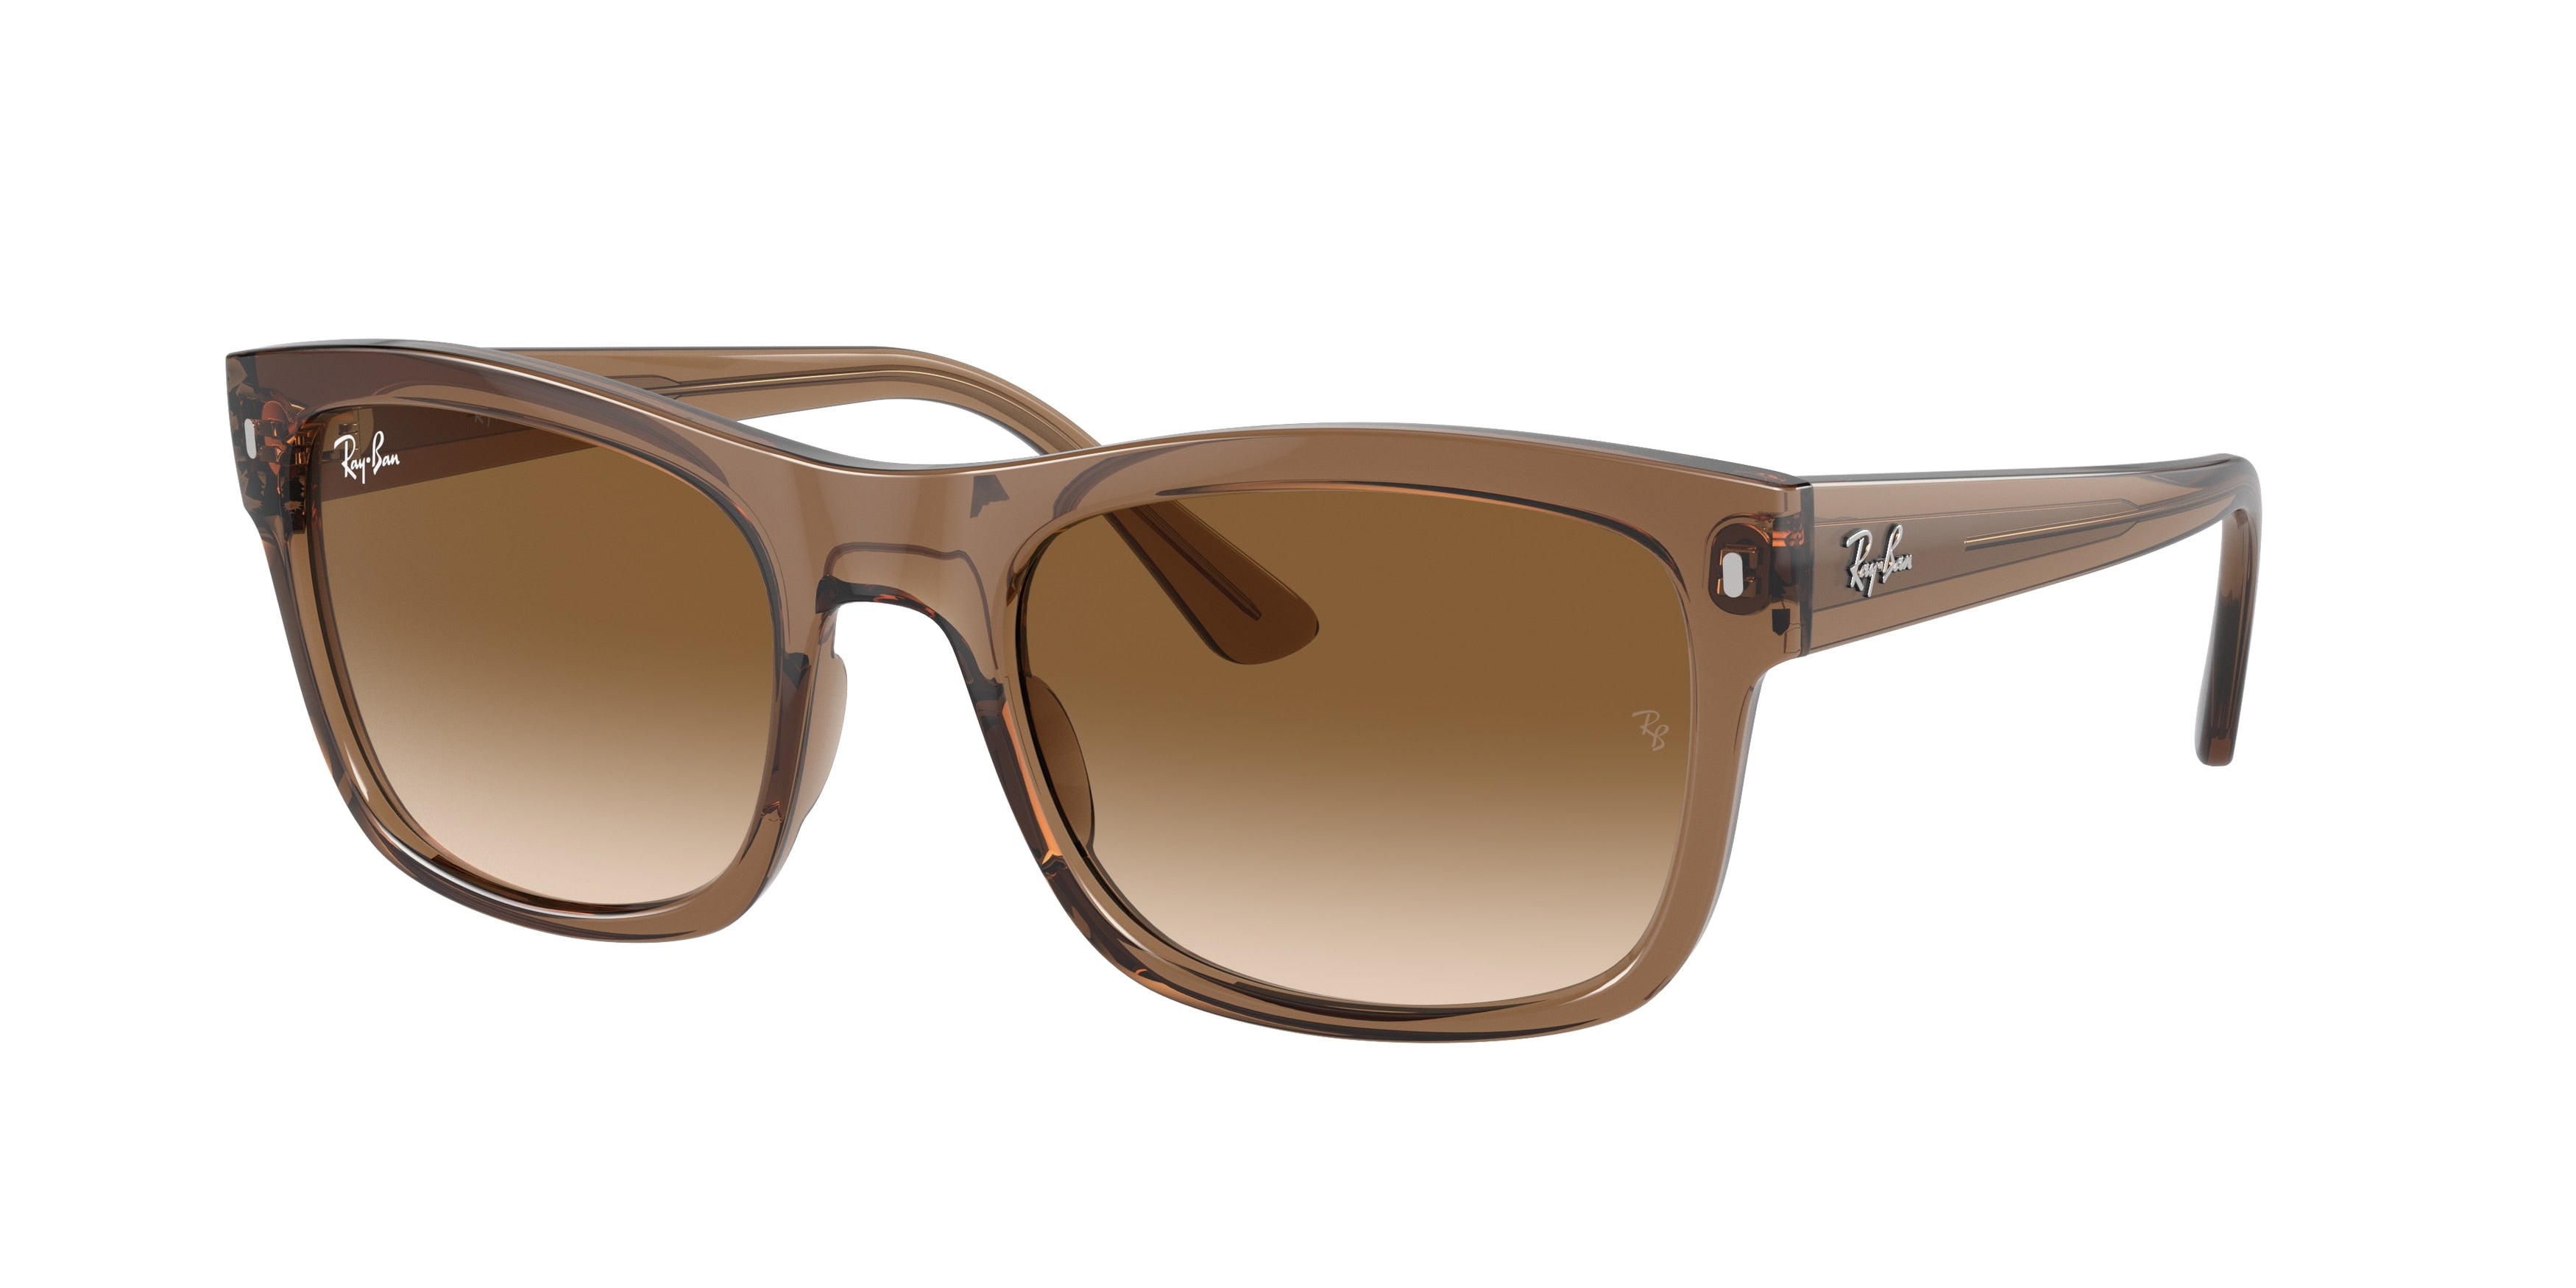 Ray-Ban RB4428 Square Sunglasses  664051-Transparent Light Brown 56-145-21 - Color Map Beige